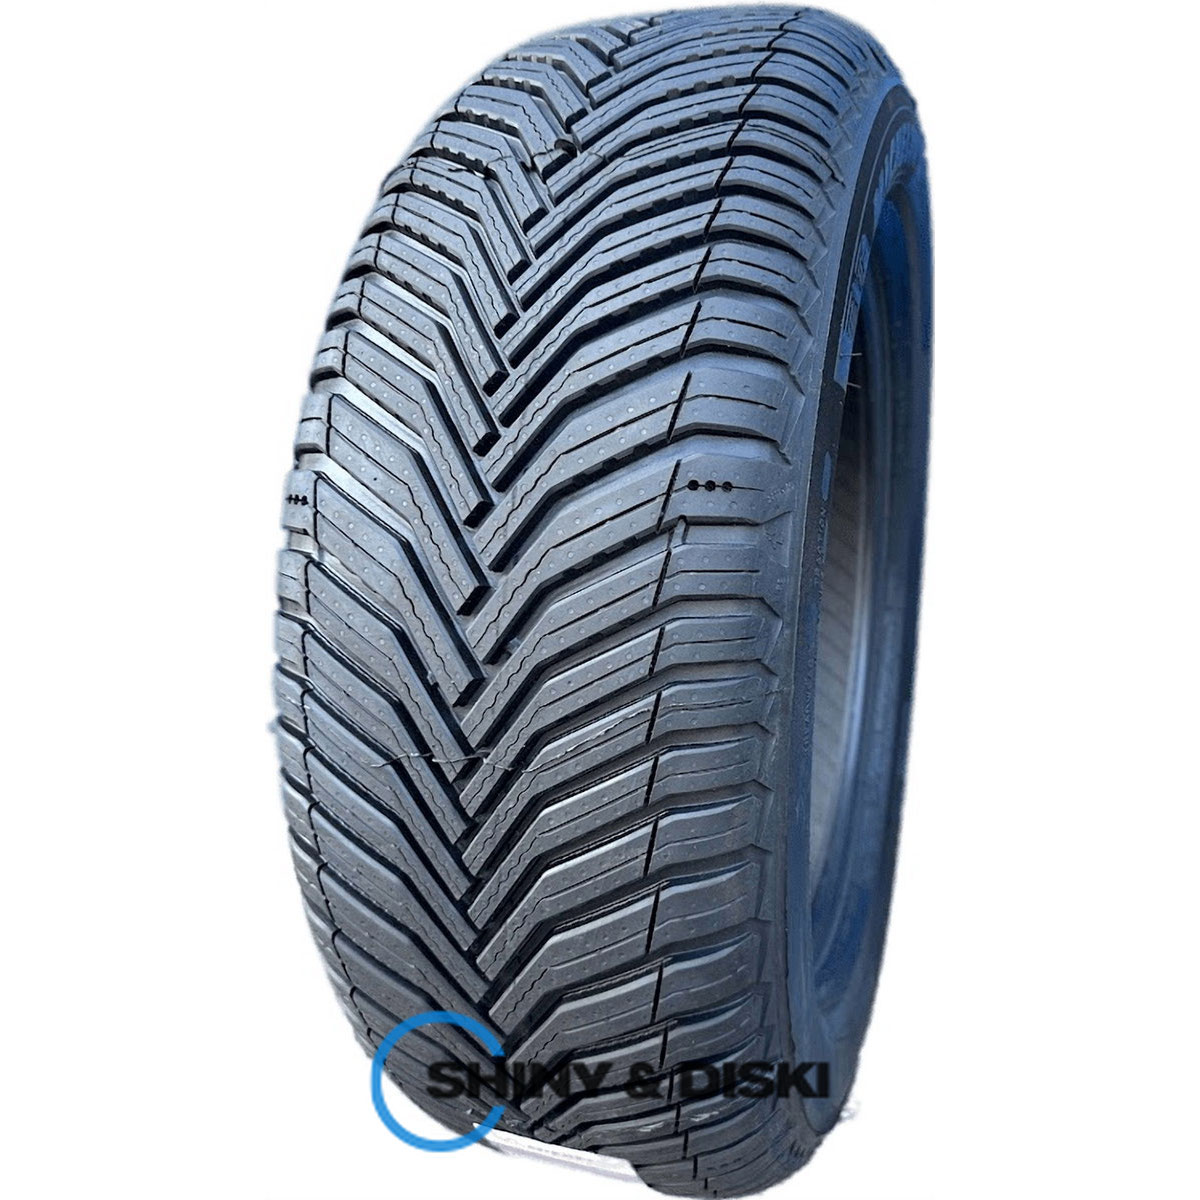 покрышки michelin cross climate 2 245/40 r18 93y